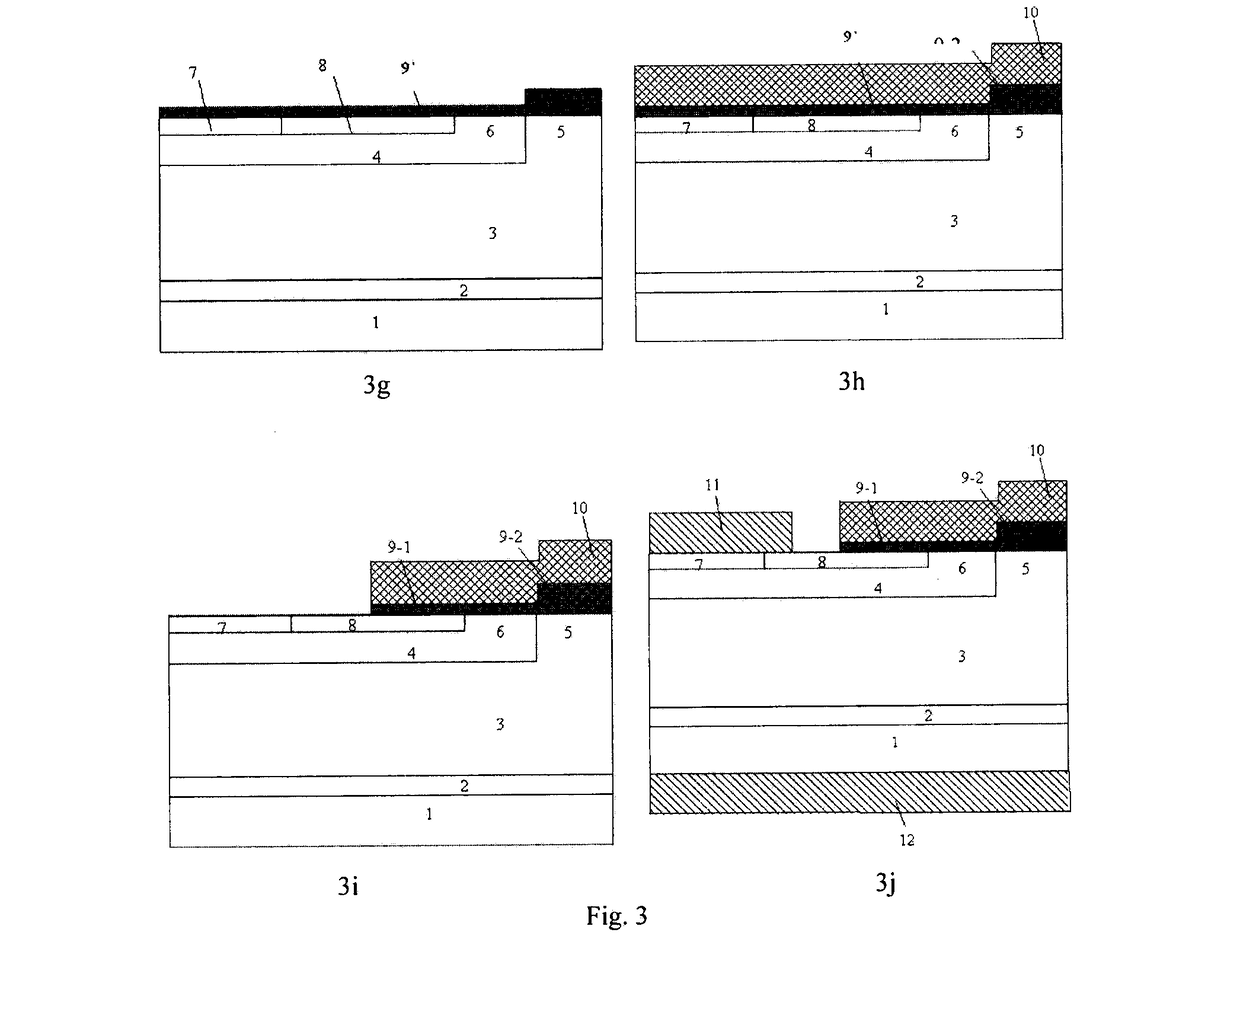 Silicon carbide mosfet device and method for manufacturing the same